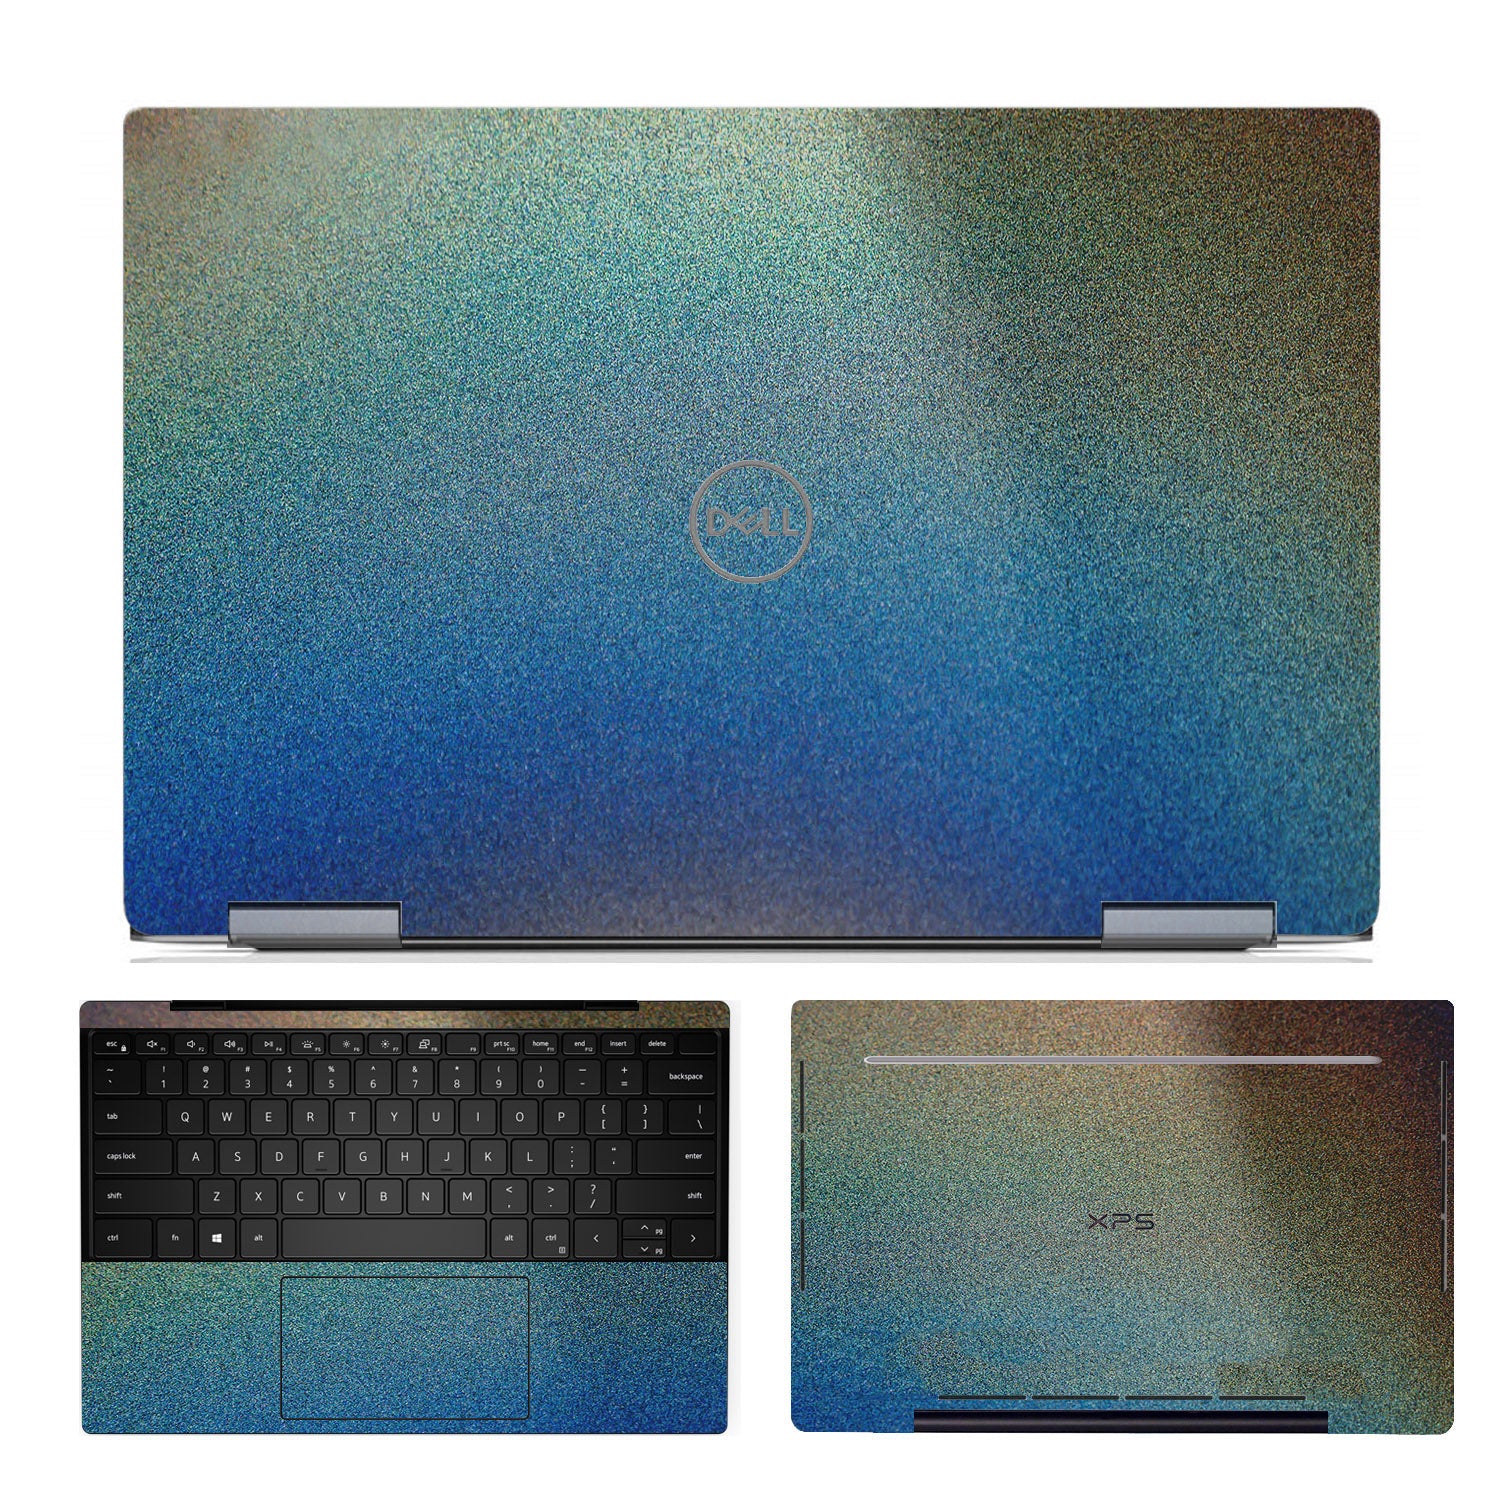 for Dell XPS 13 2-in-1 (9310)